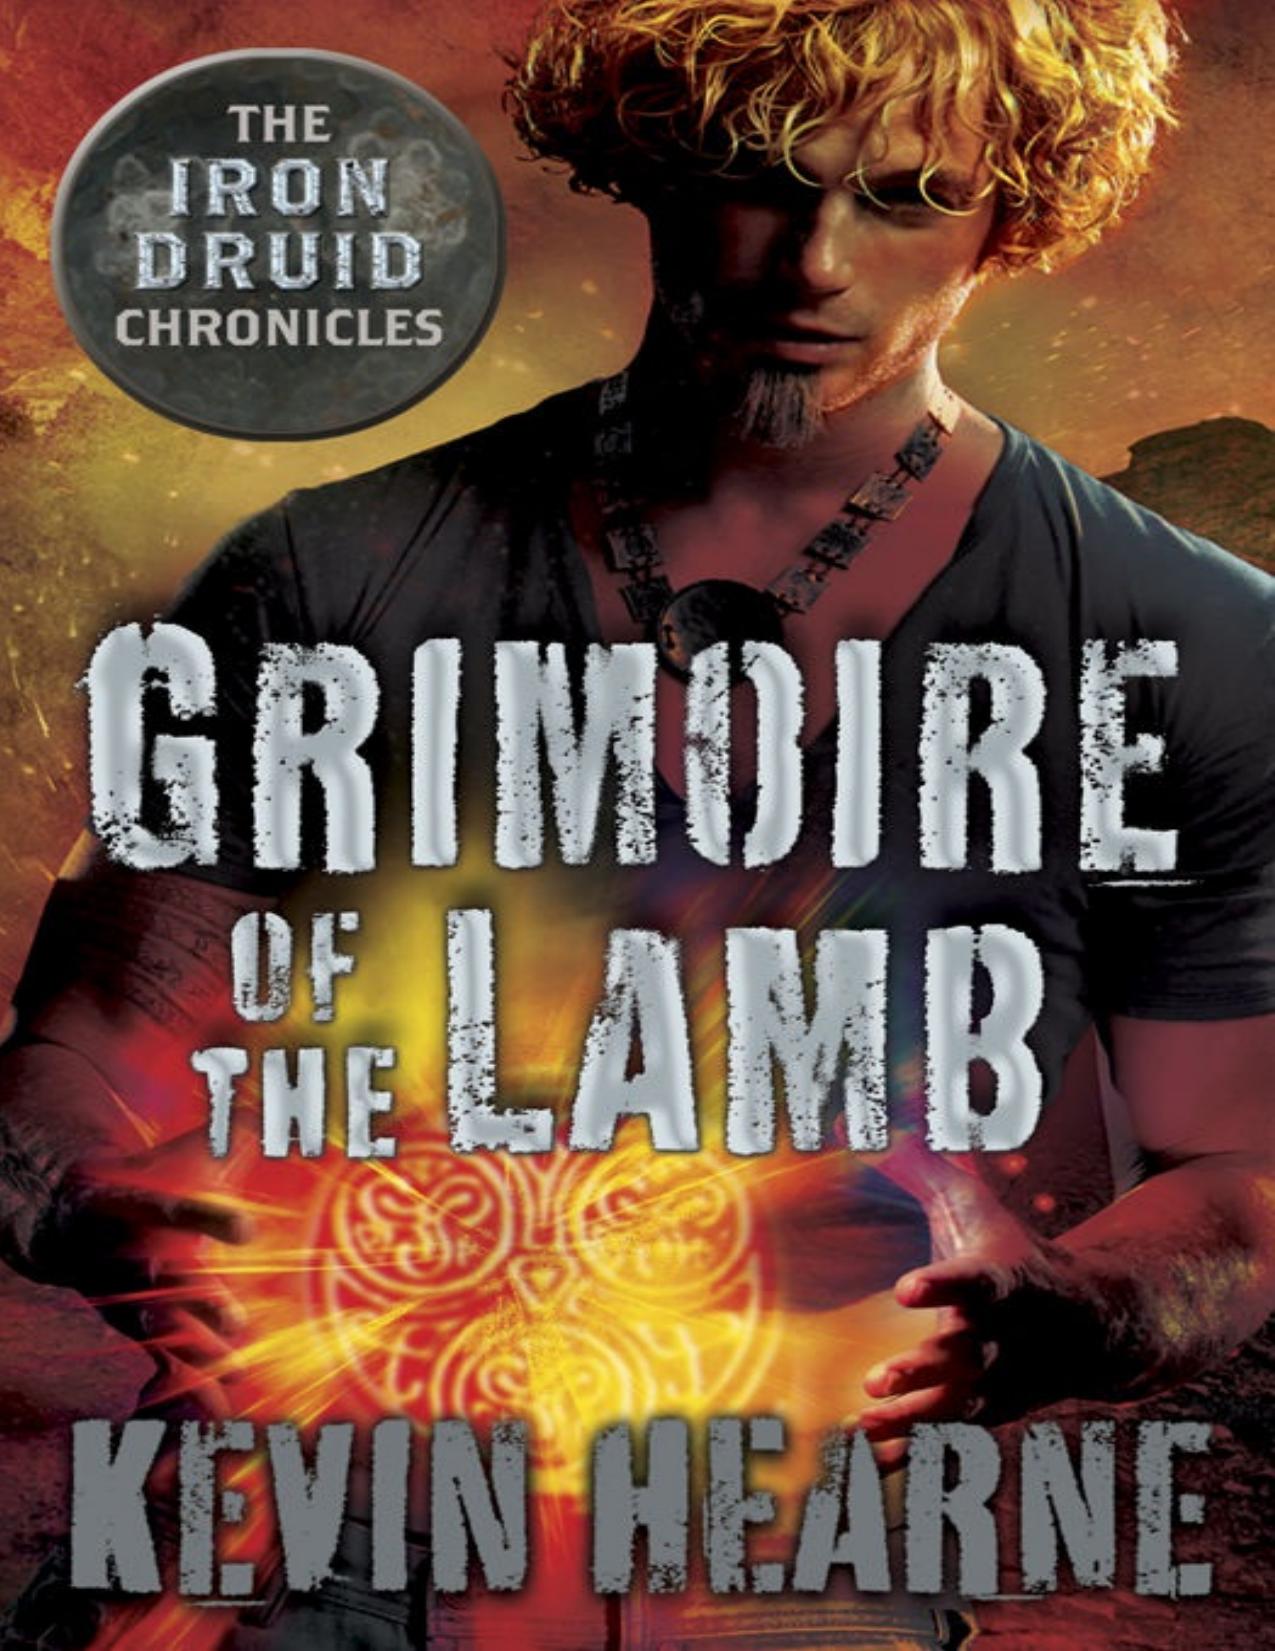 Grimoire of the Lamb: An Iron Druid Chronicles Novella (The Iron Druid Chronicles) by Kevin Hearne